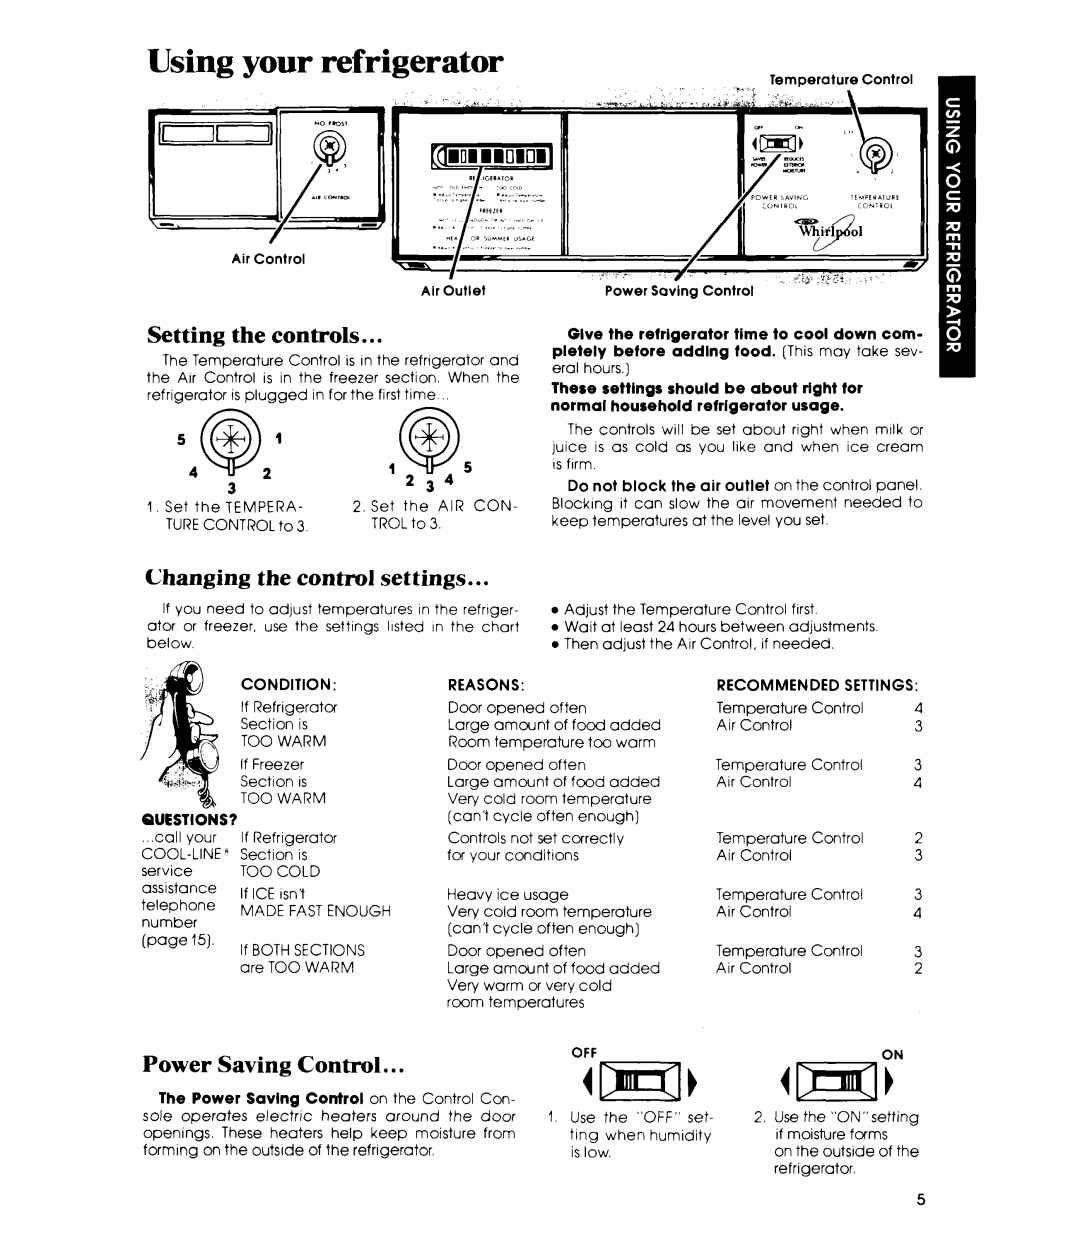 Whirlpool ED26MK Using your refrigerator, Setting the controls, Changing the control settings, Power, Control, 54@,’, page 